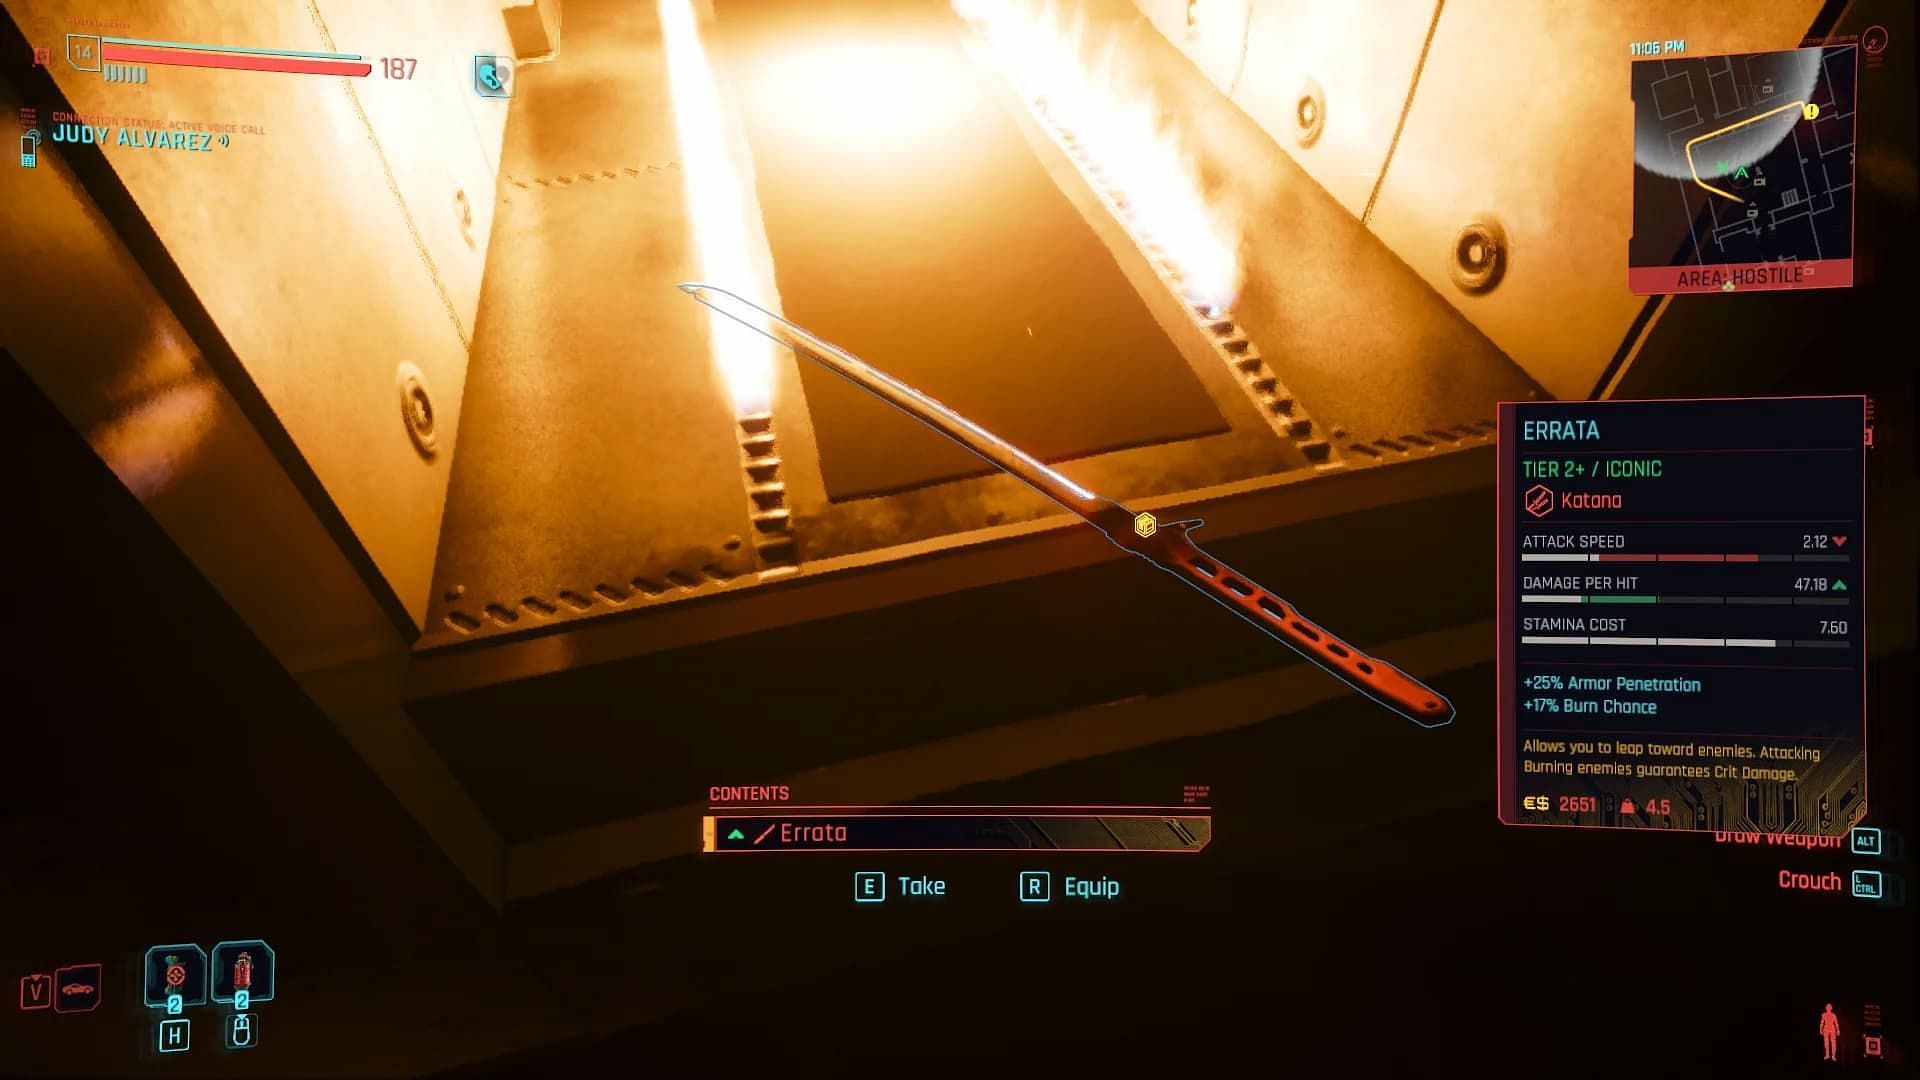 The Thermal Katana in the game (Image via CD Projekt Red)